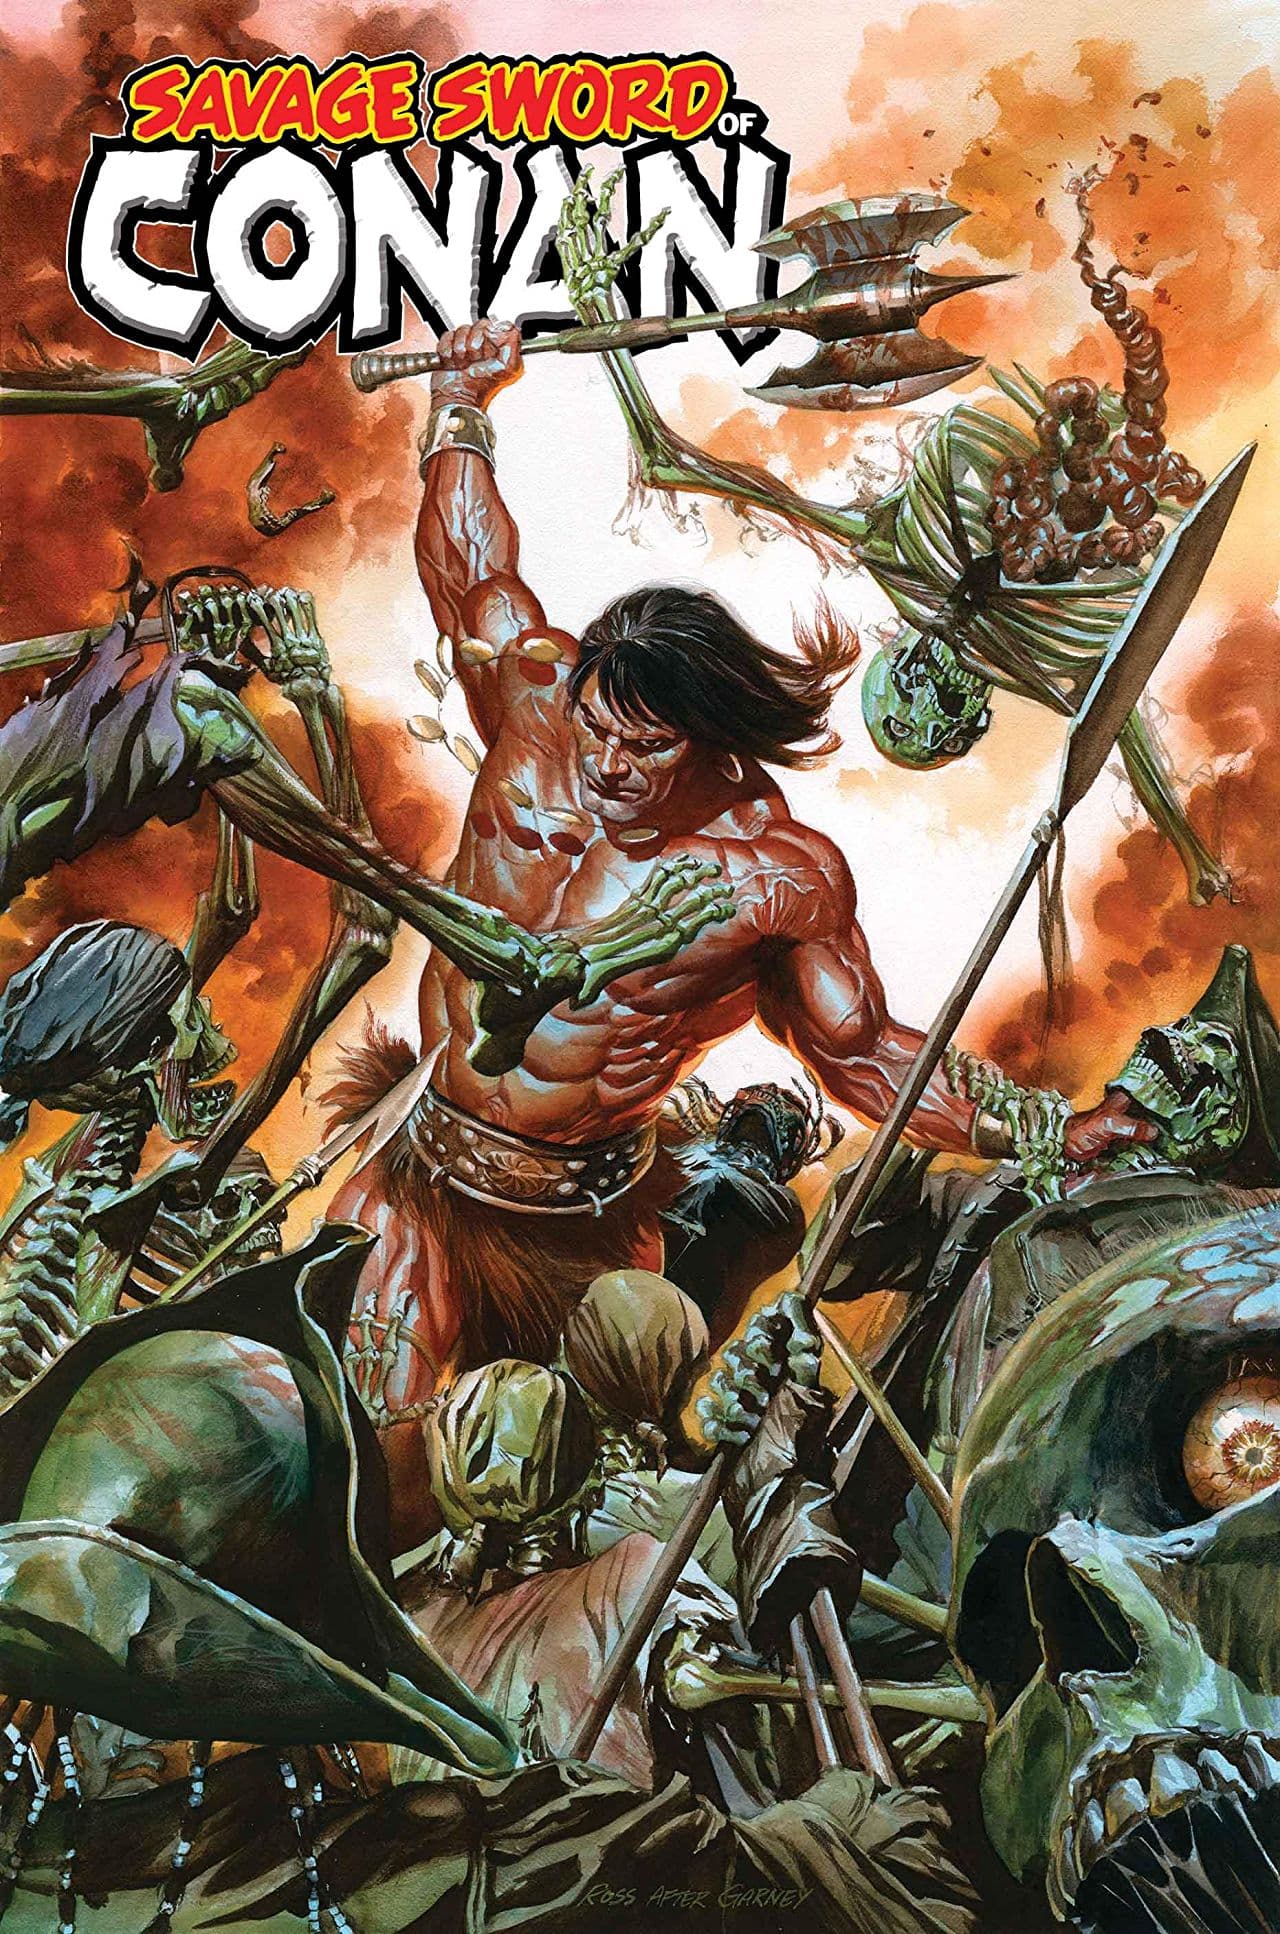 SAVAGE SWORD OF CONAN #1 cover by Alex Ross